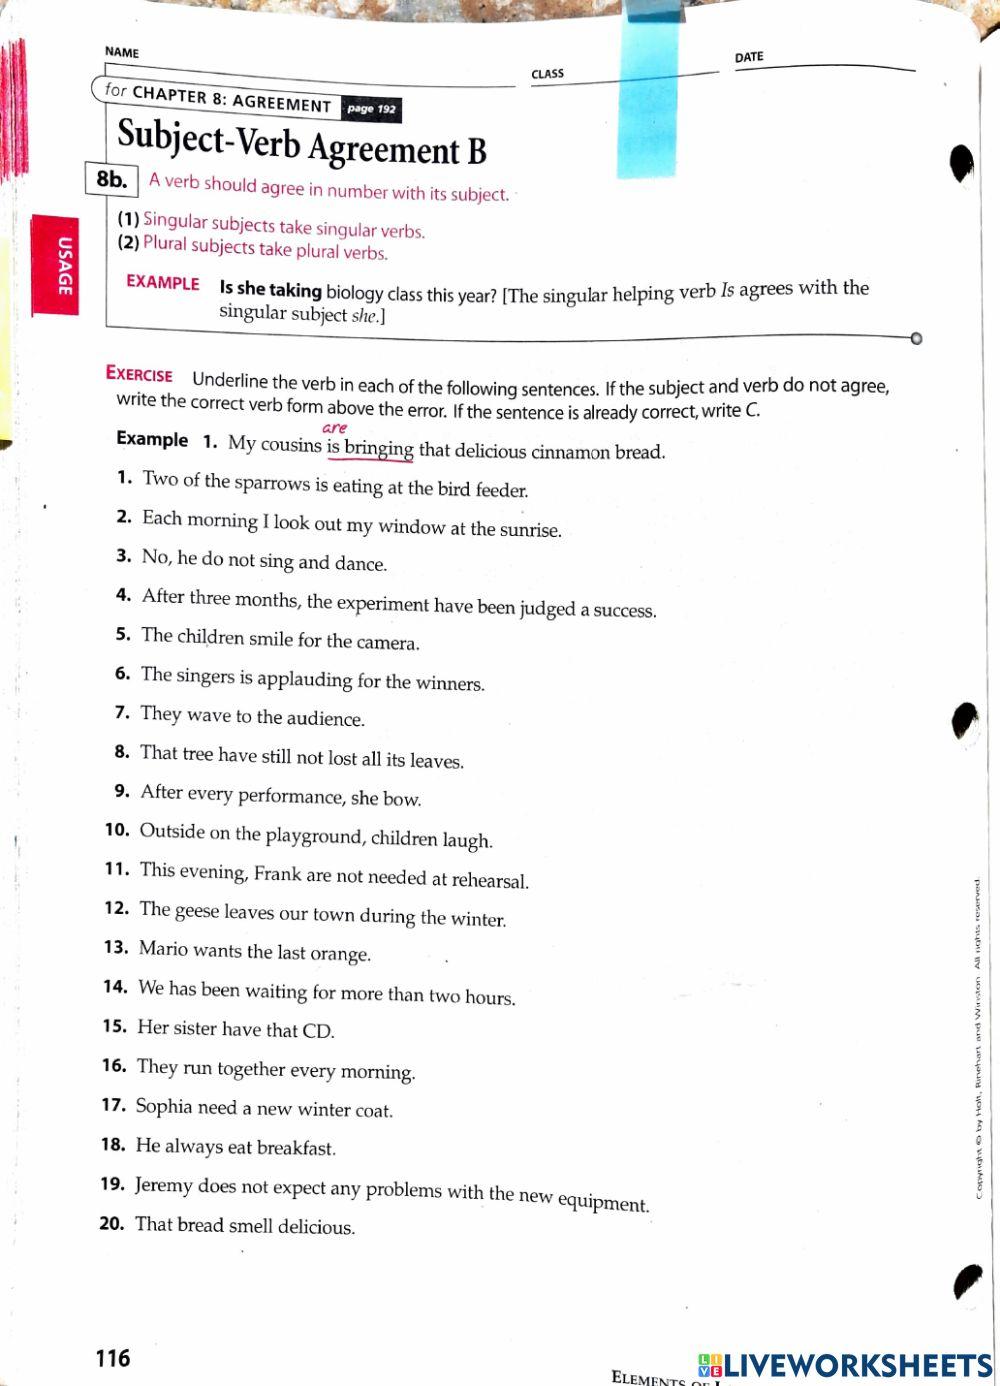 Subject verb agreement exercises